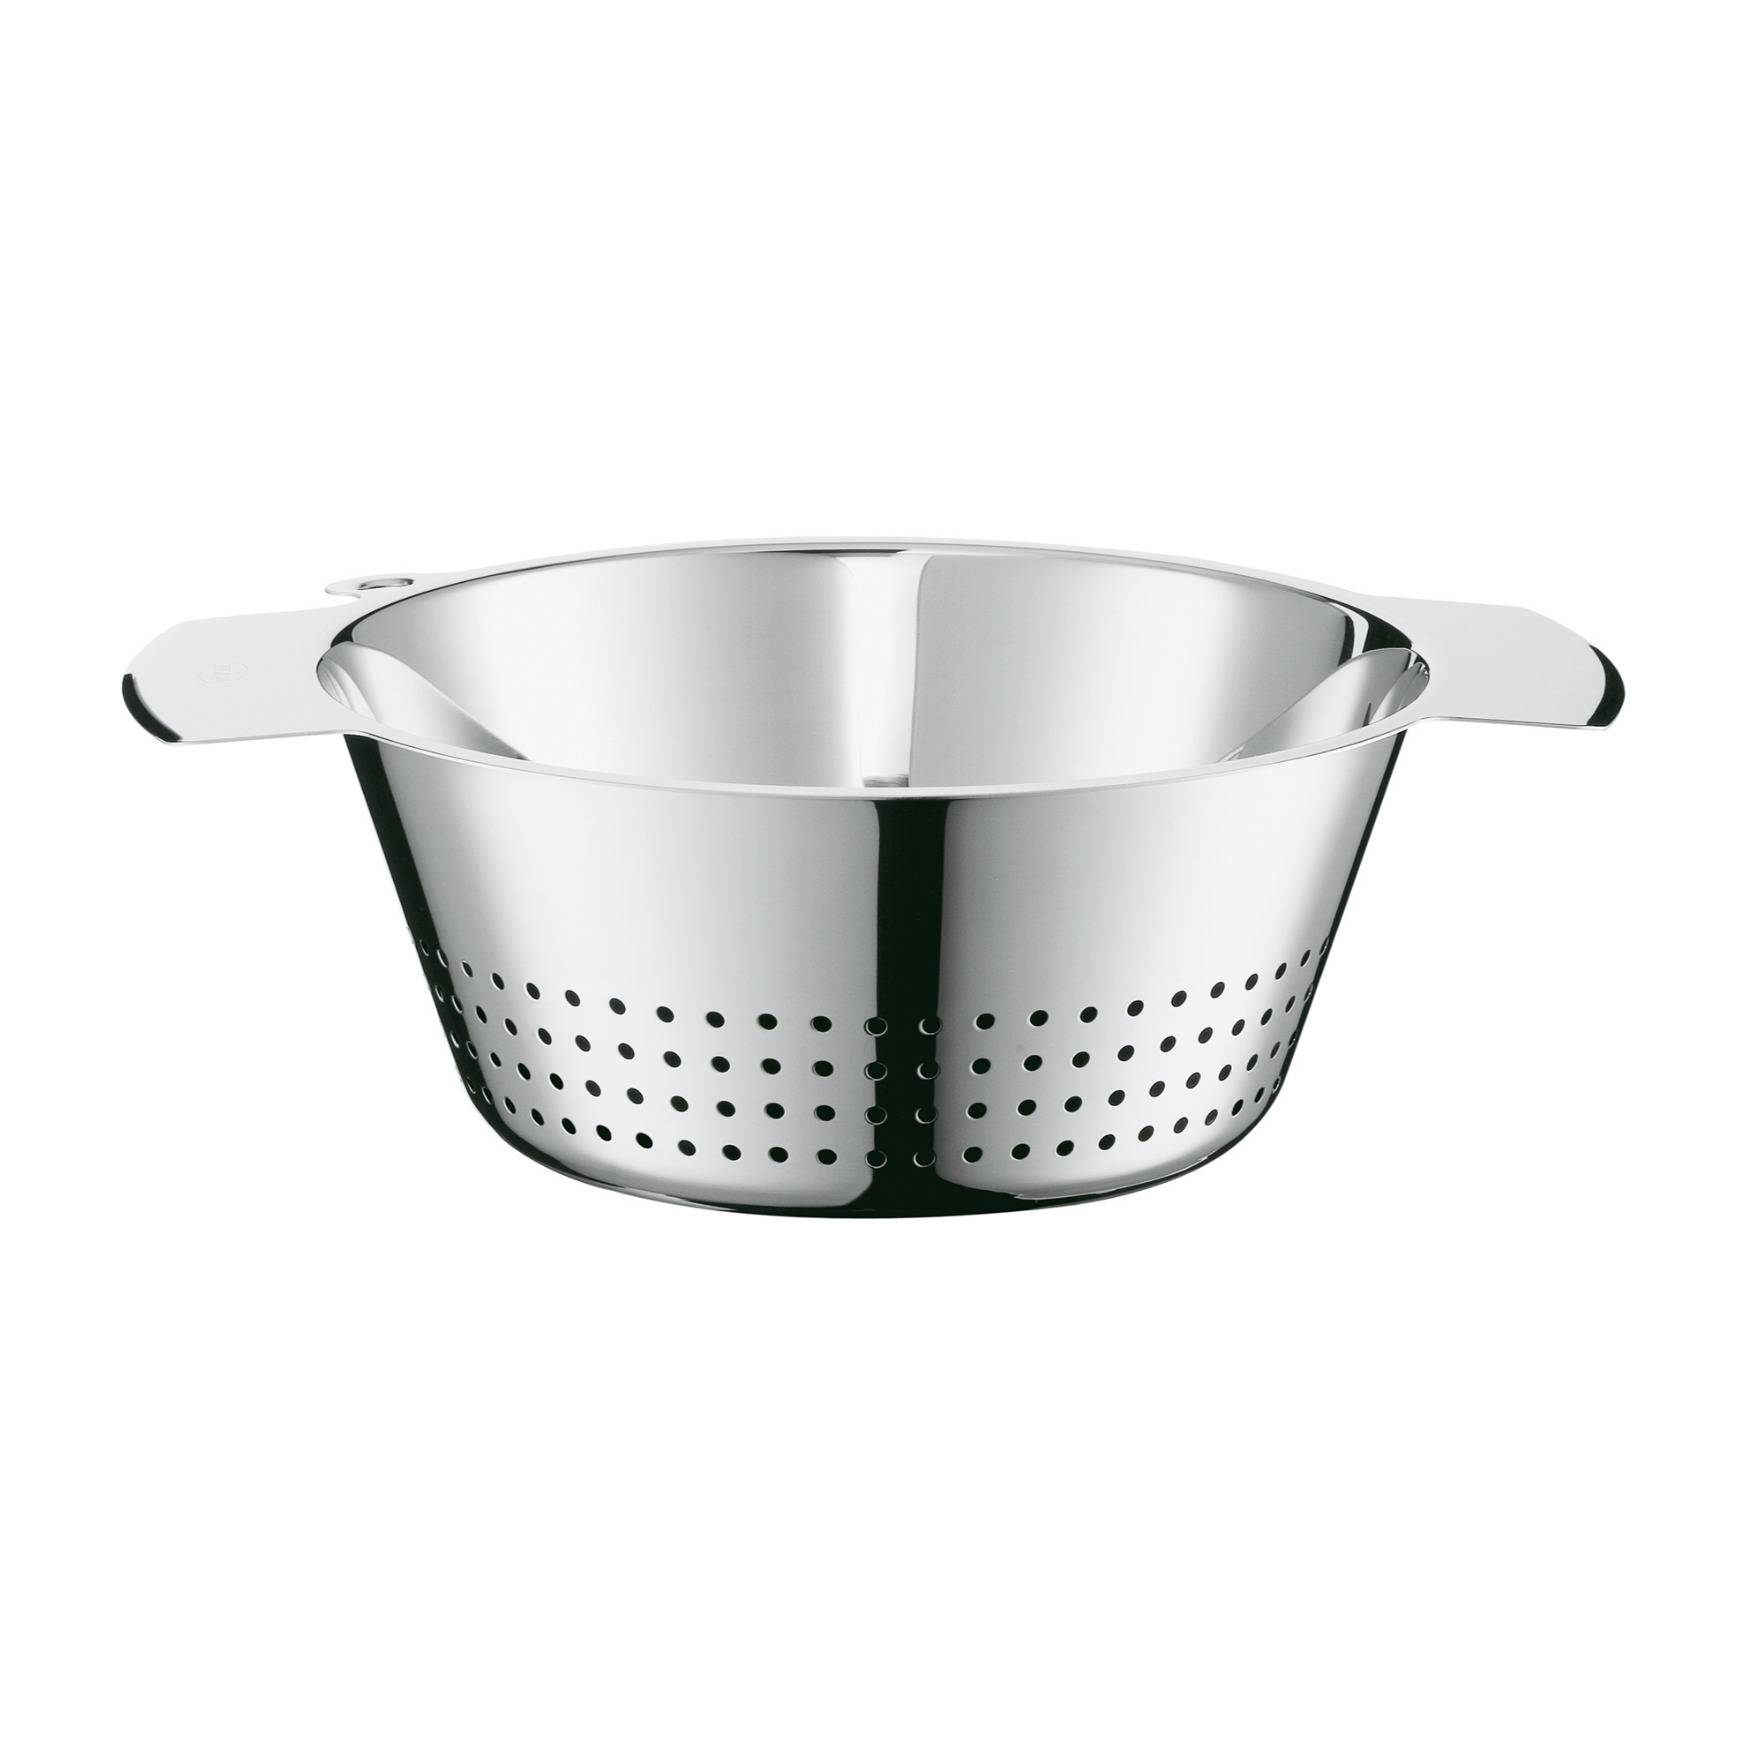 Rosle 9.5-Inch Conical Colander